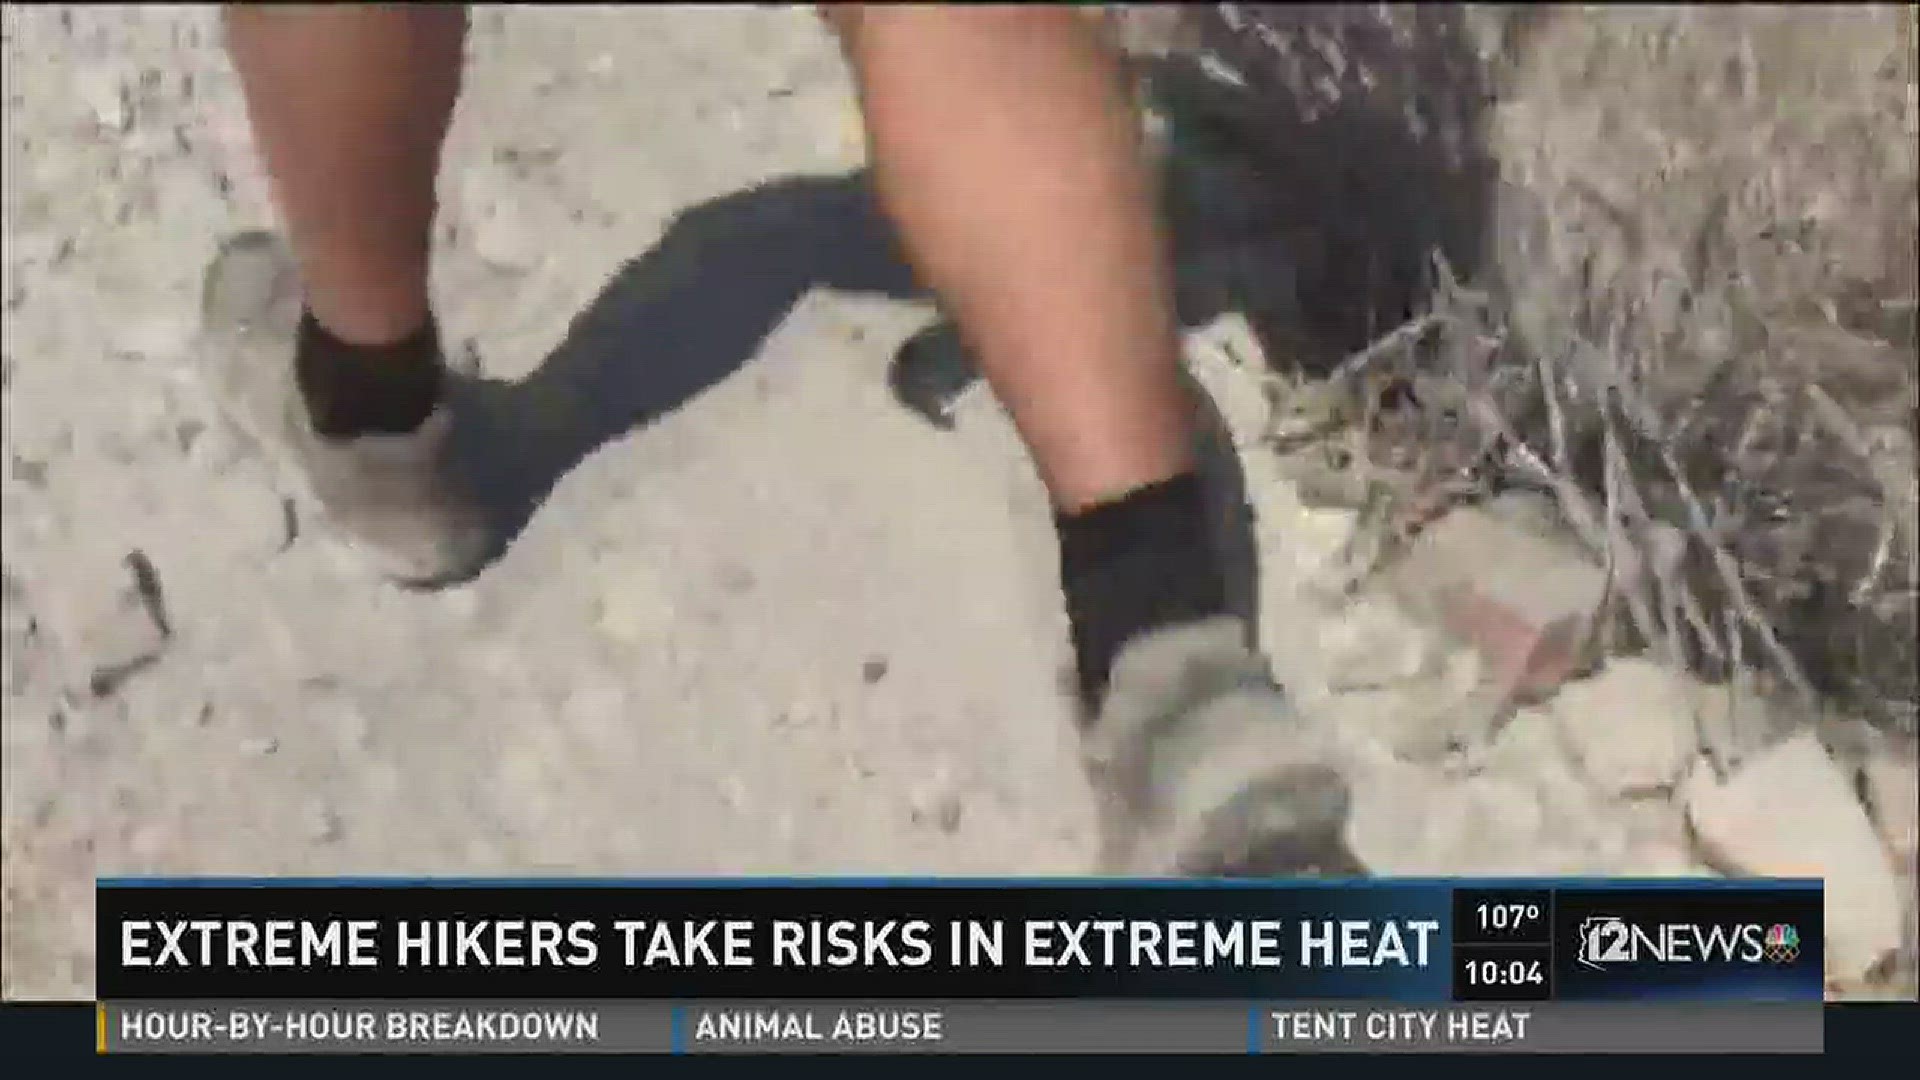 Extreme hikers risks in extreme heat.